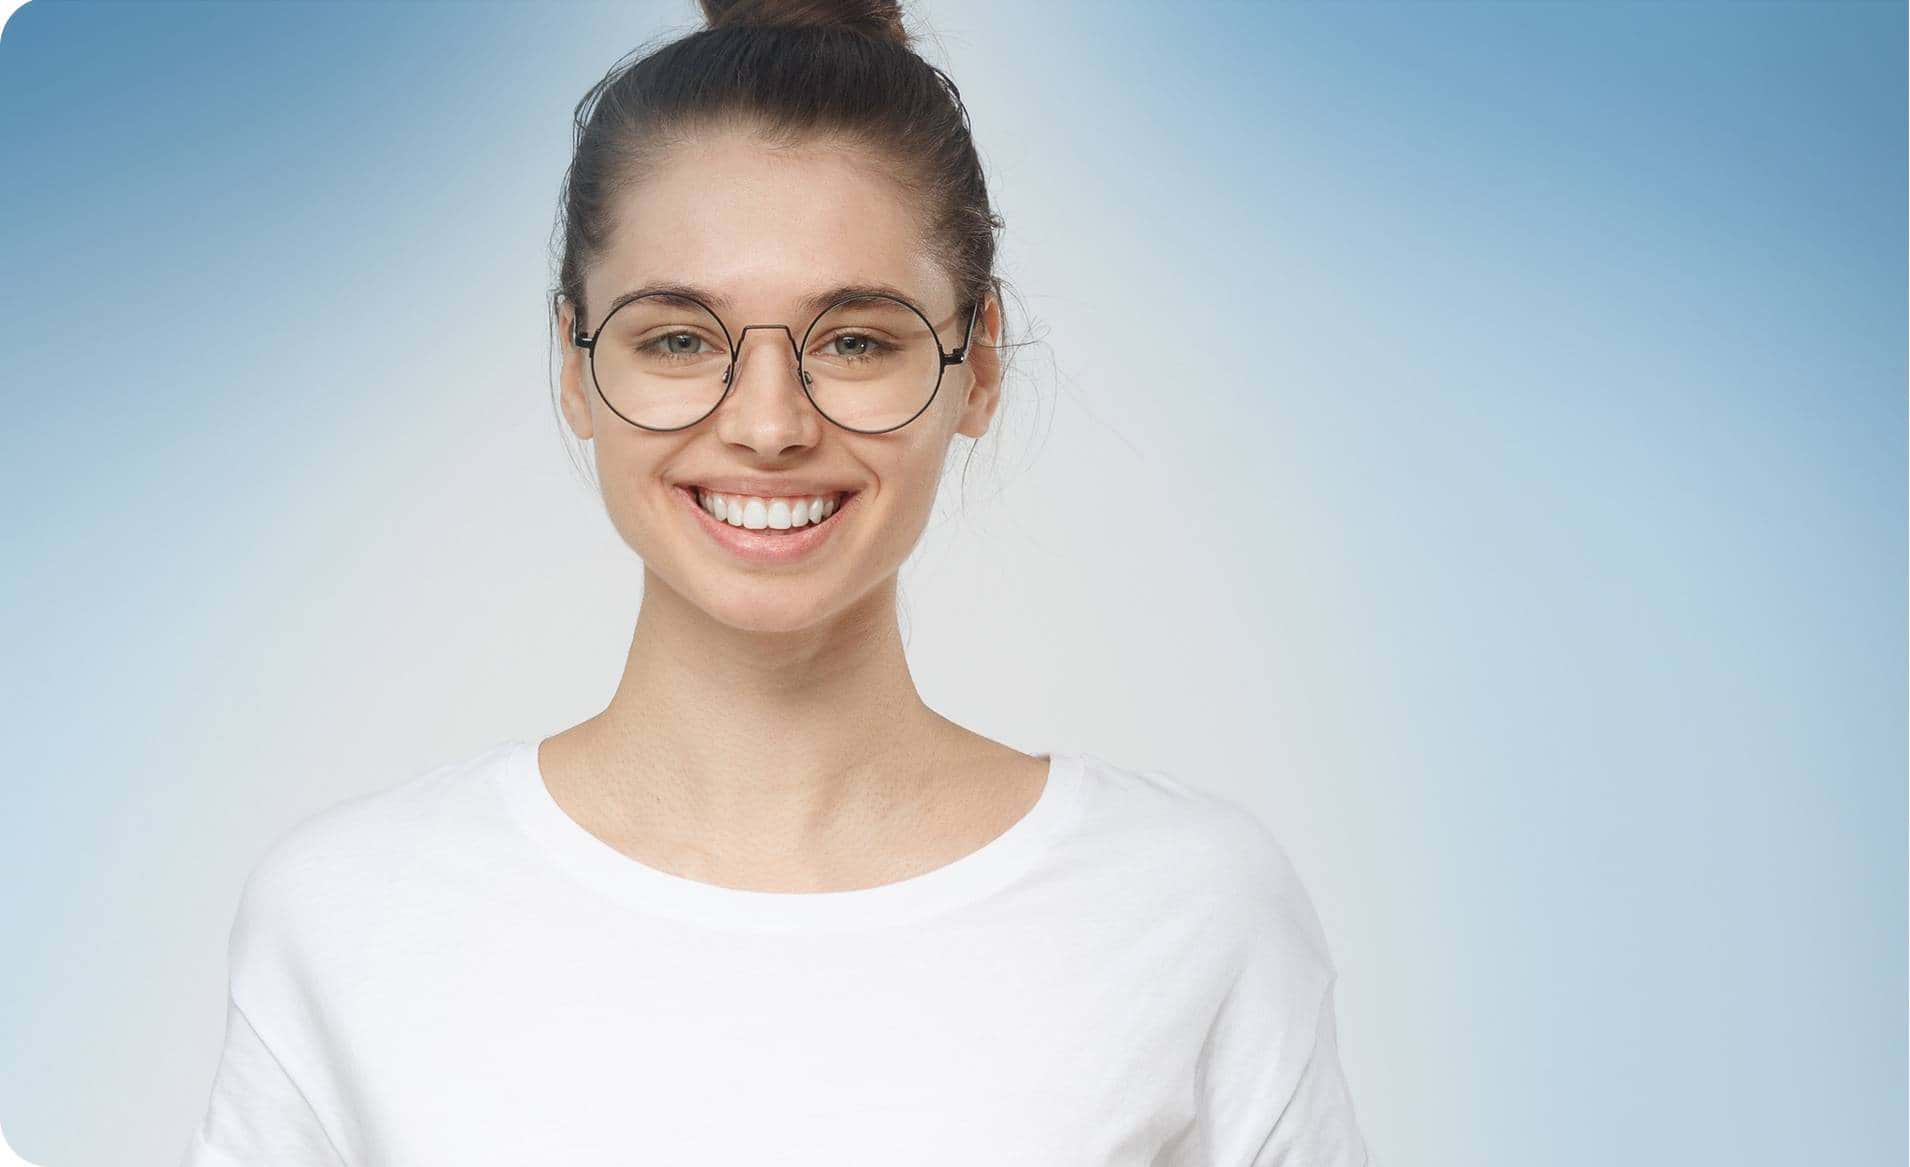 https://www.istockphoto.com/au/photo/young-european-woman-standing-with-hands-in-pockets-wearing-blank-white-tshirt-with-gm1001506012-270713129